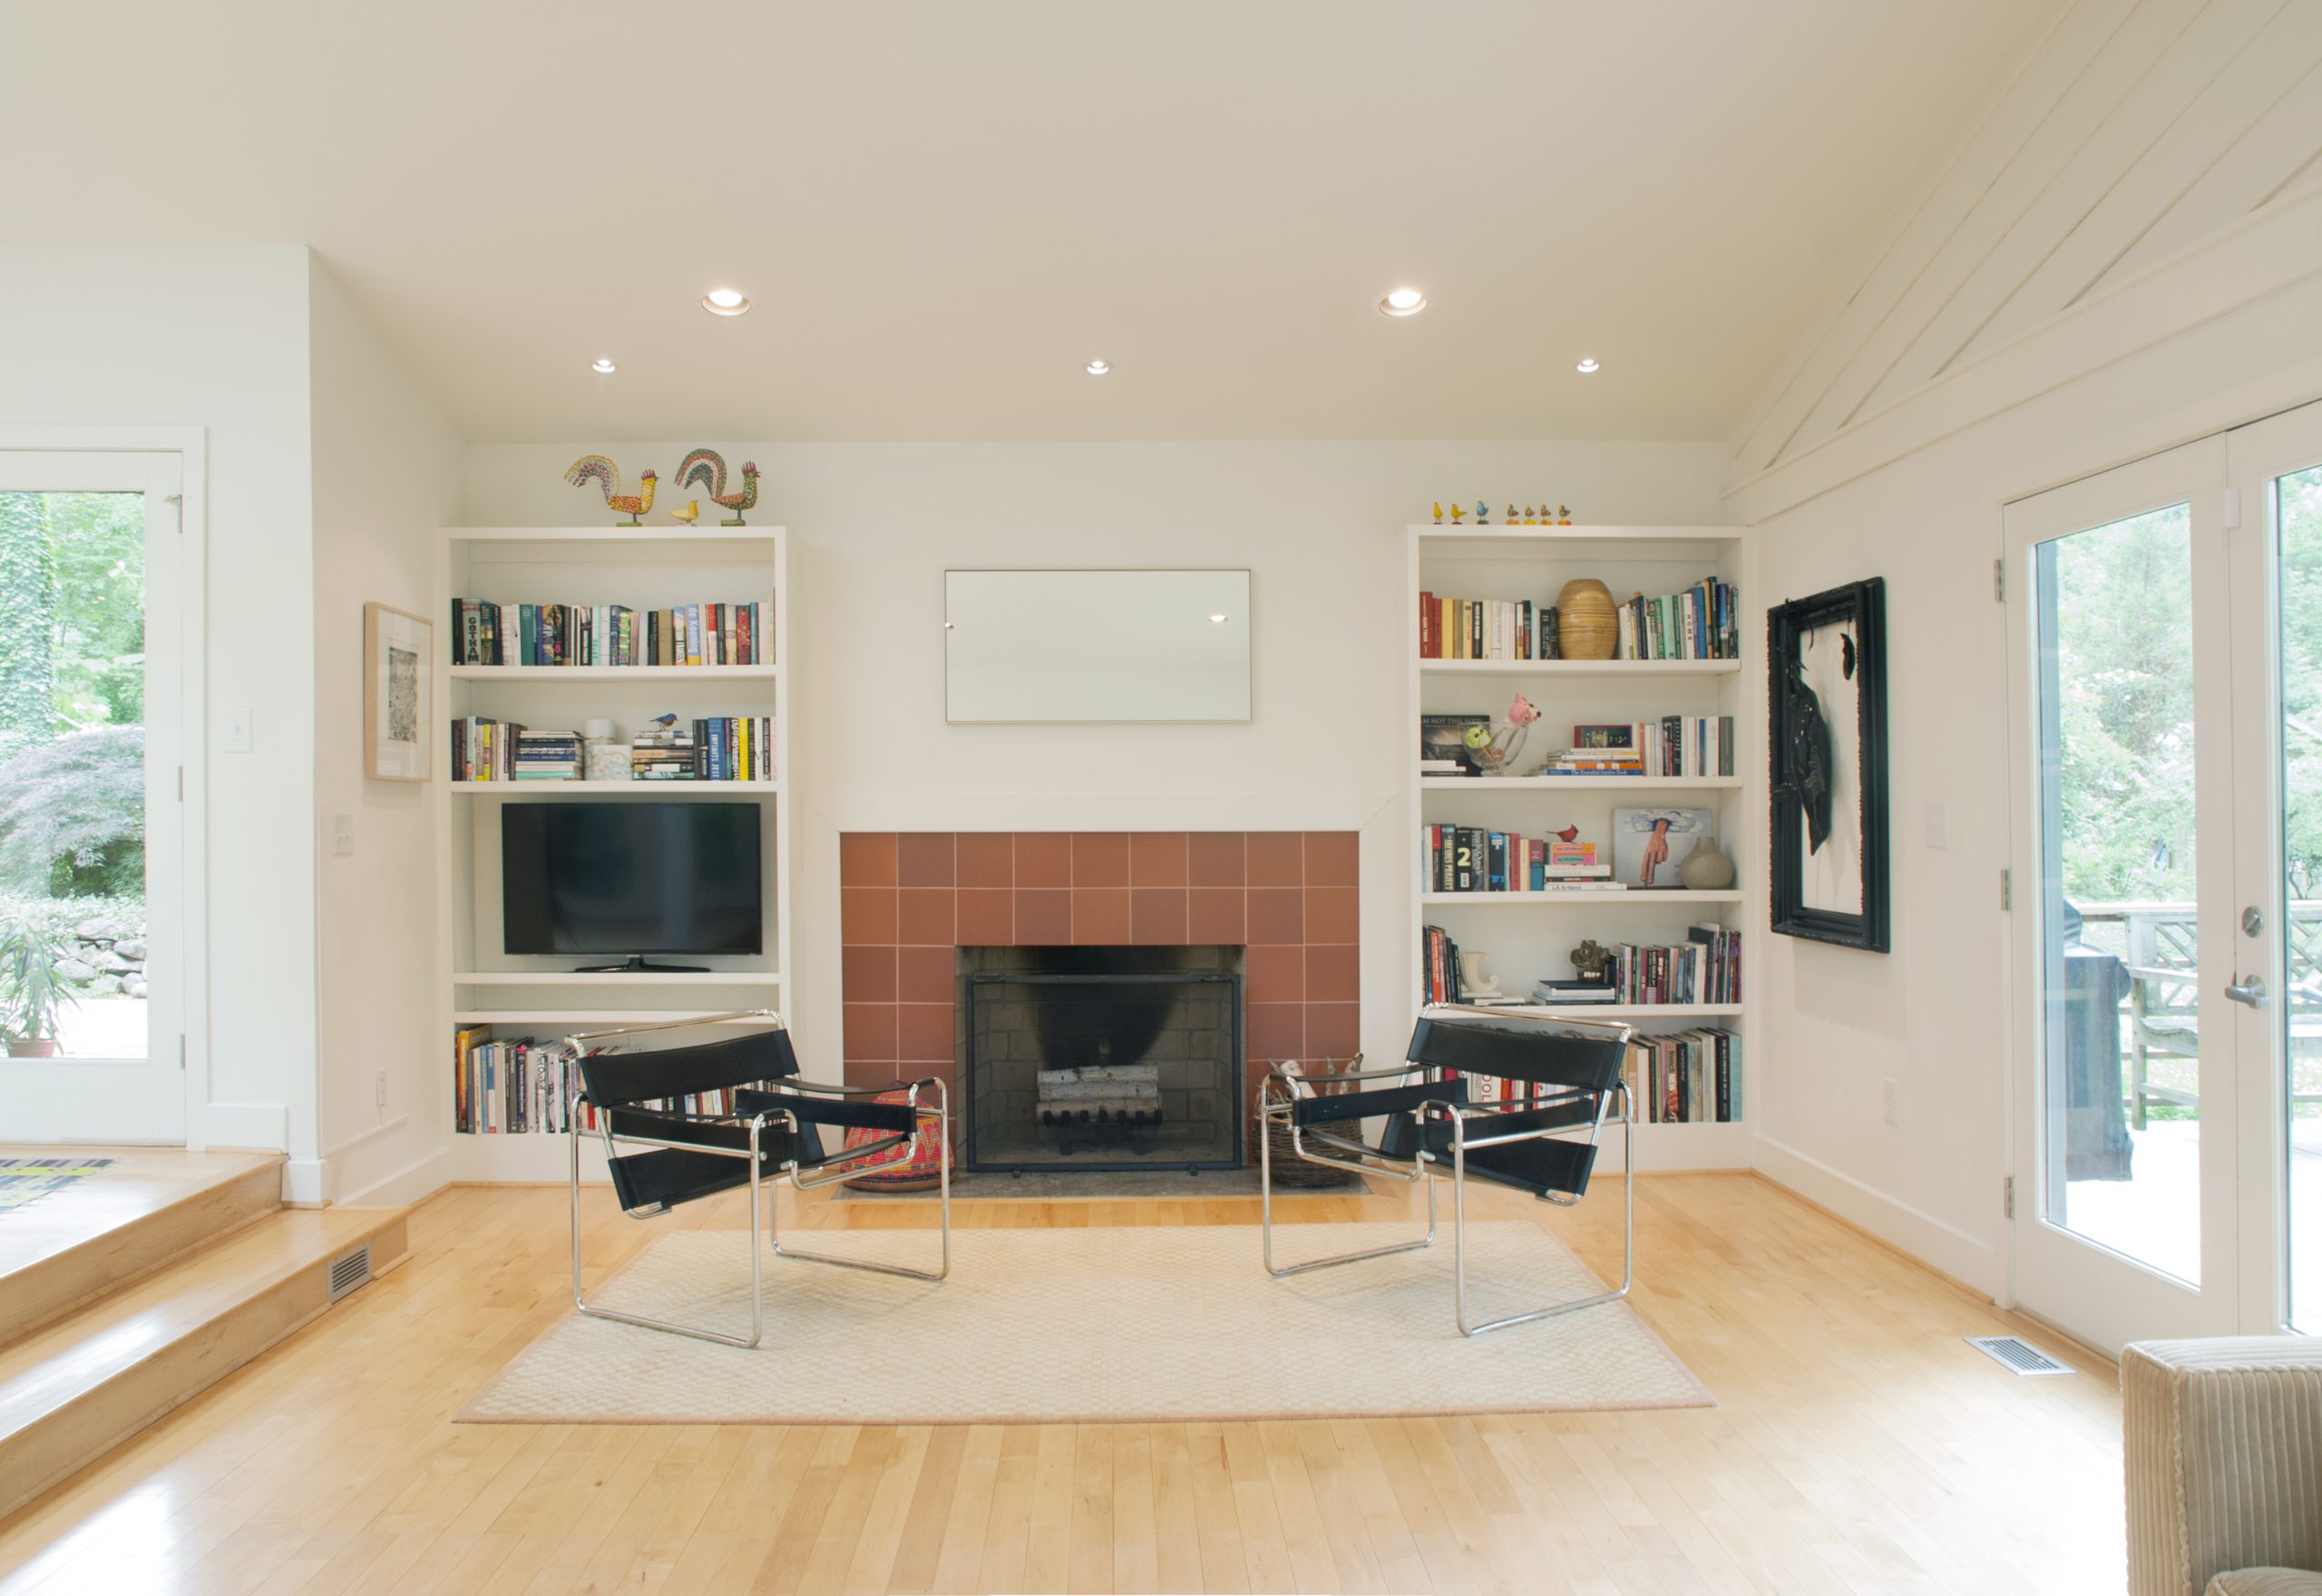 A bright and cozy seating area with built-in bookshelves and a terra cotta tiled fireplace